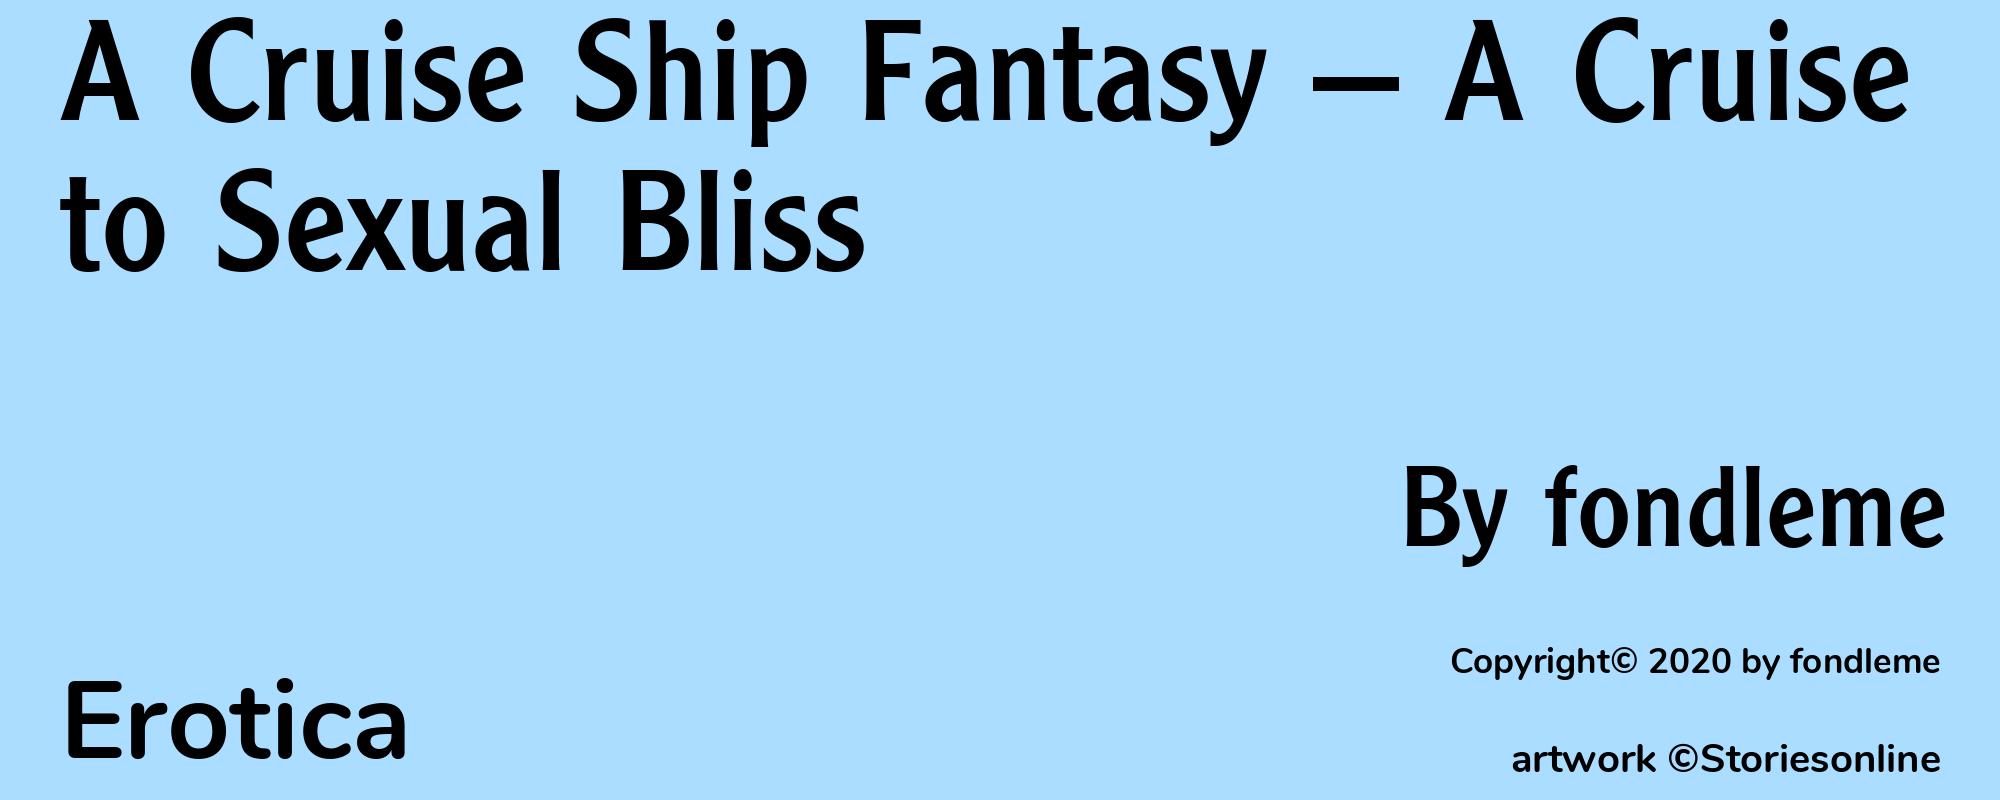 A Cruise Ship Fantasy — A Cruise to Sexual Bliss - Cover